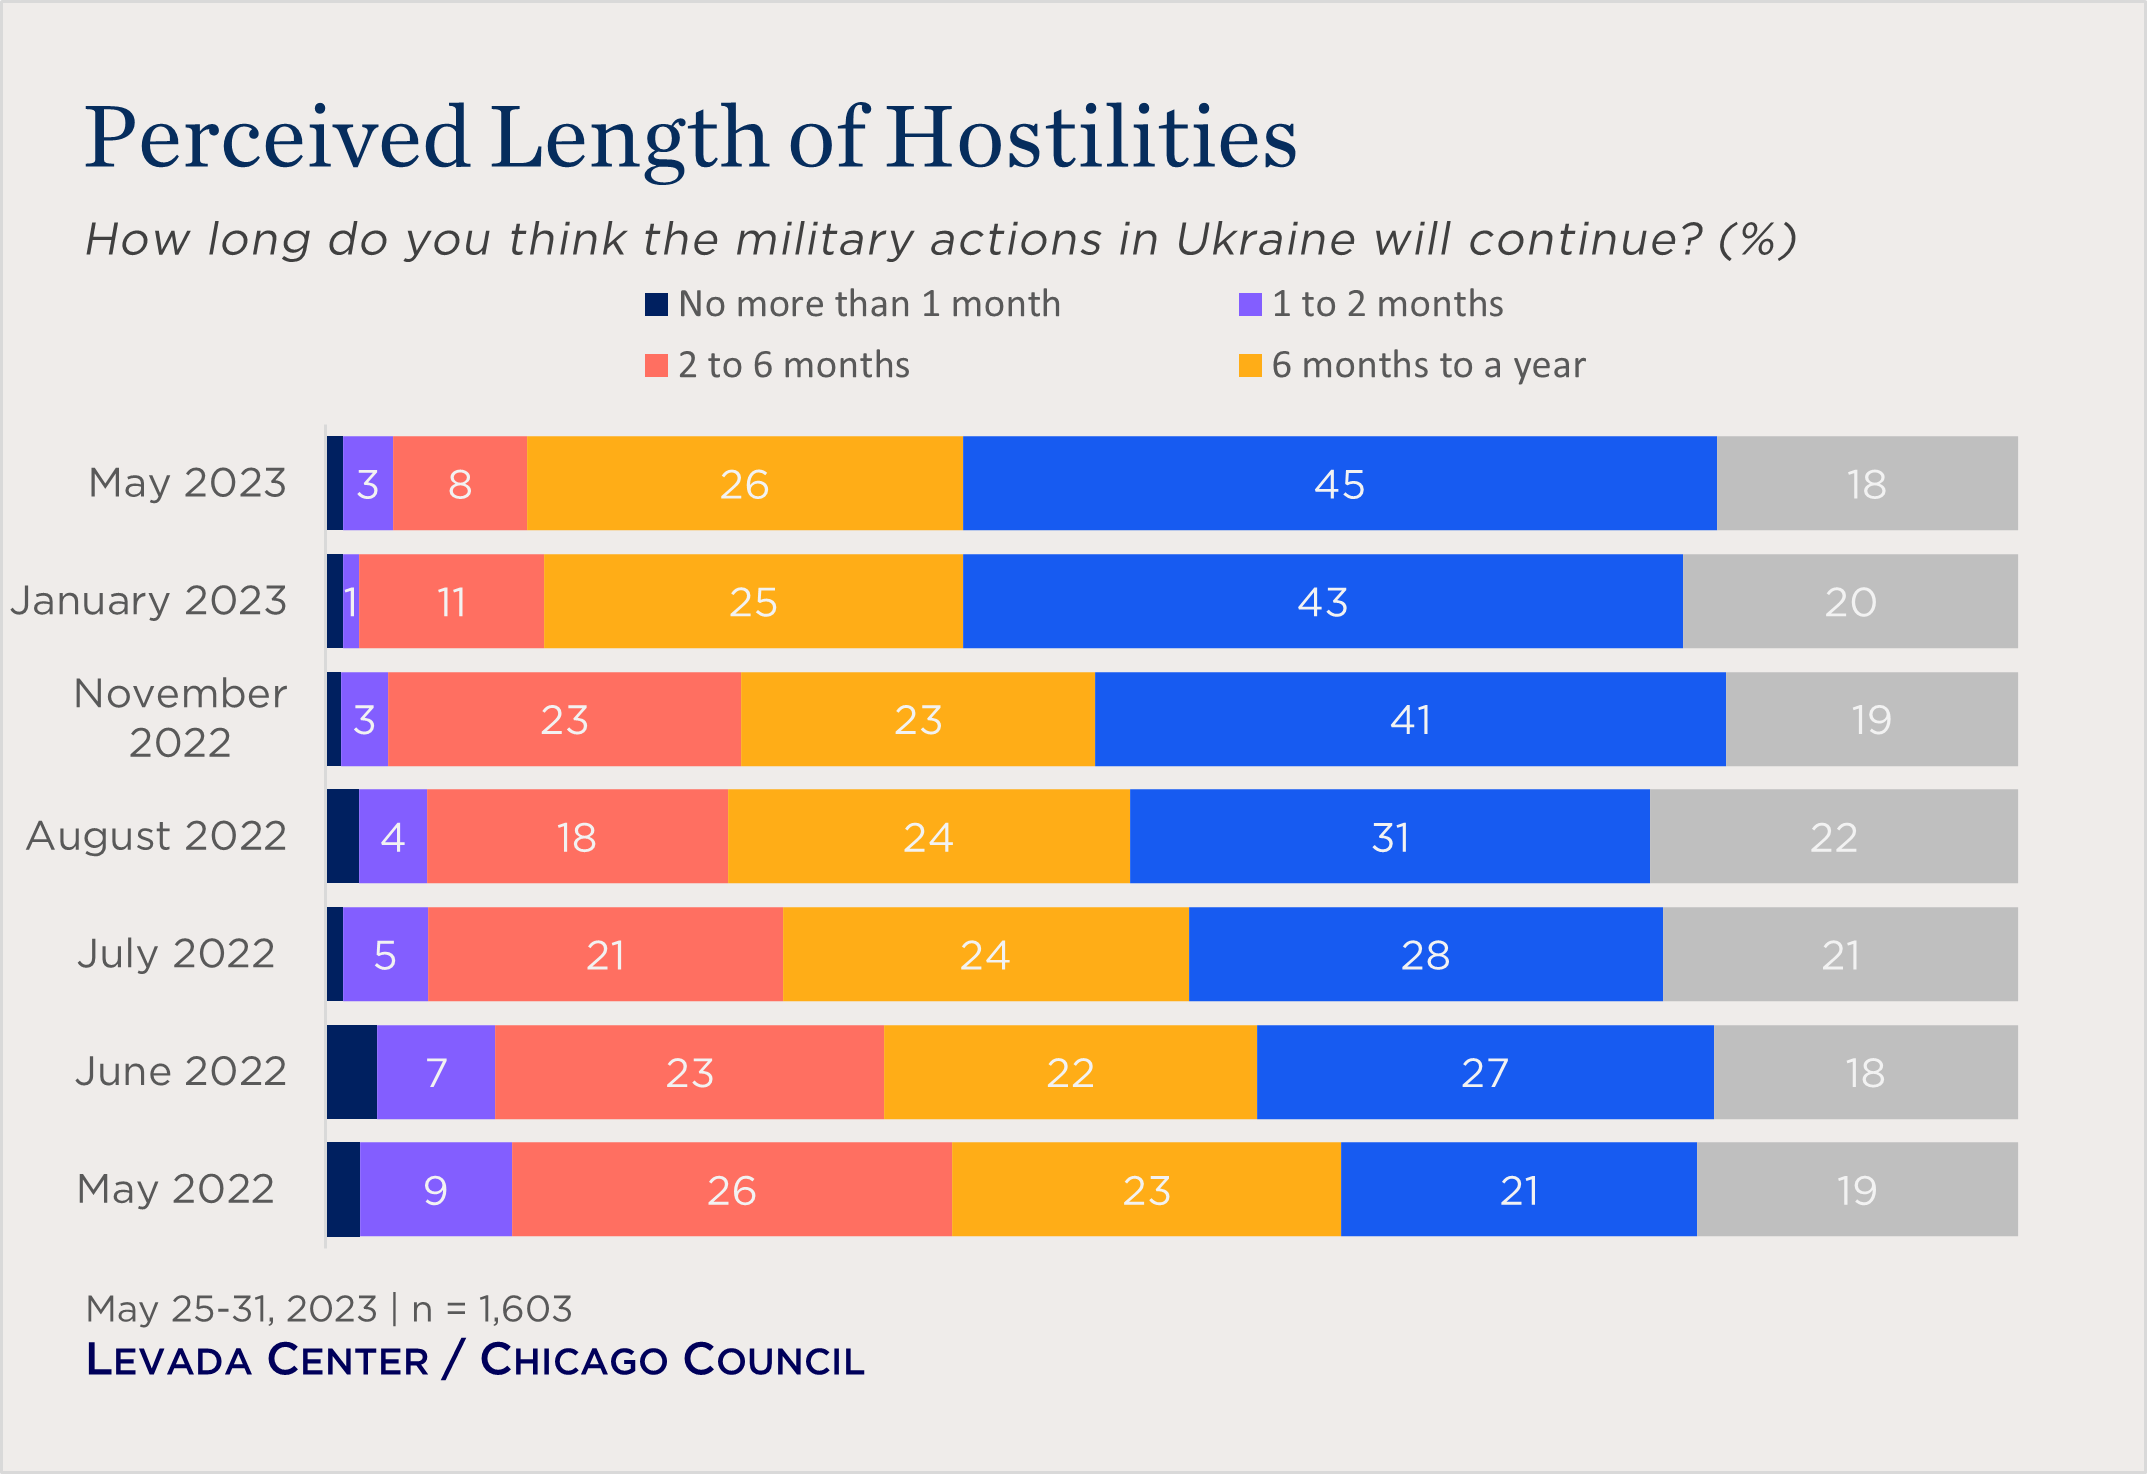 bar chart showing perceived length of hostilities